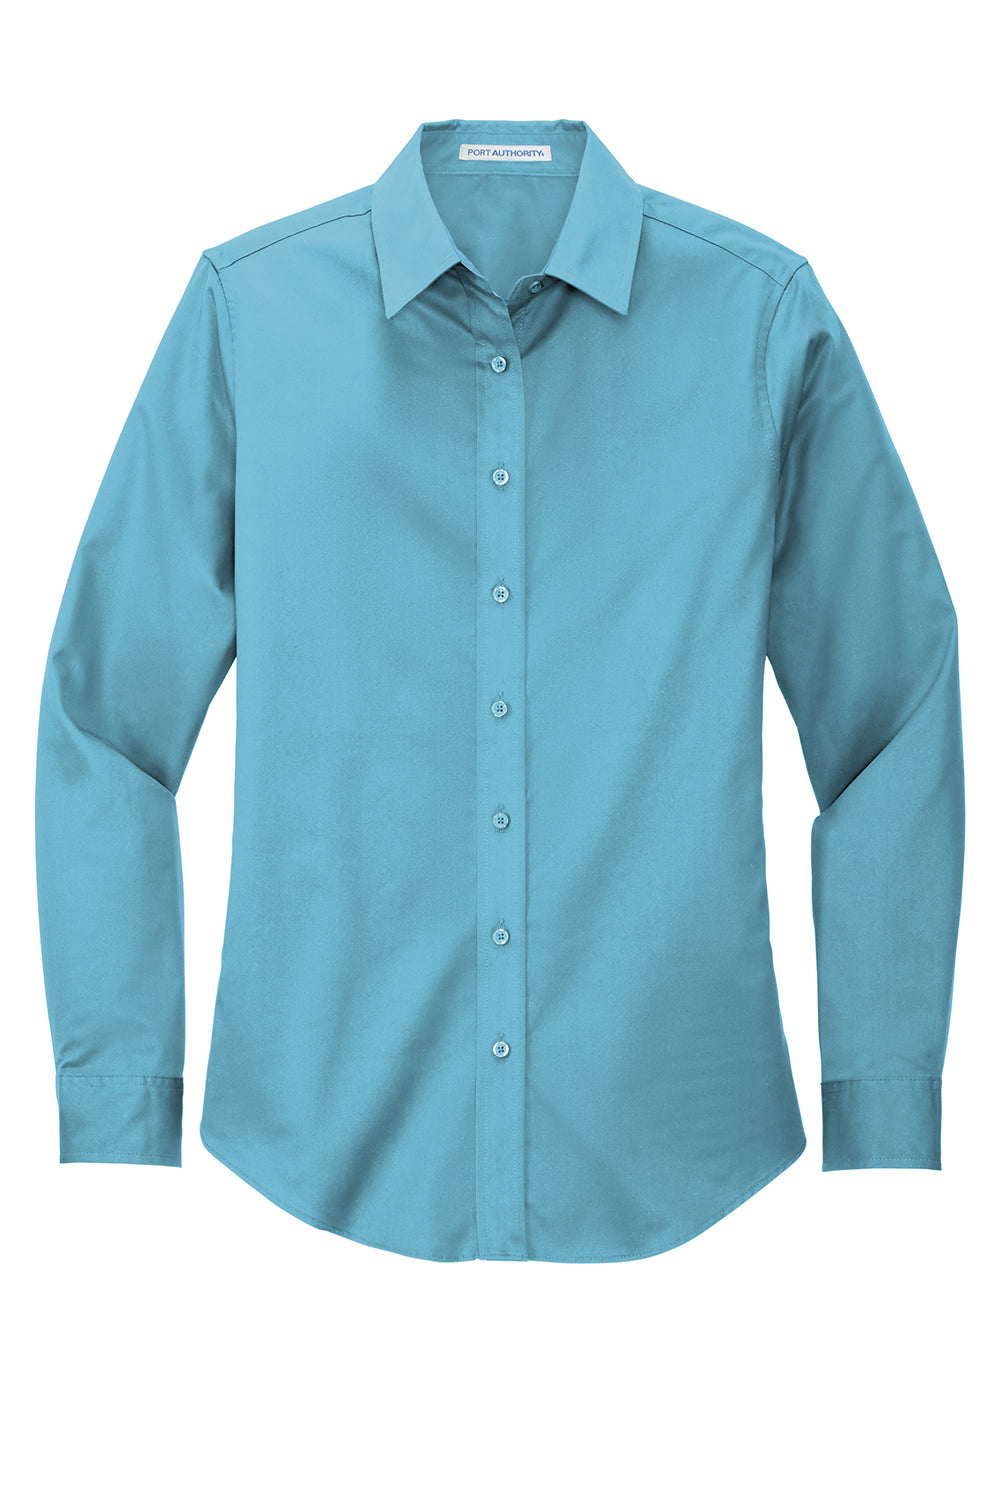 Port Authority L608 Womens Easy Care Wrinkle Resistant Long Sleeve Button Down Shirt Maui Blue Flat Front